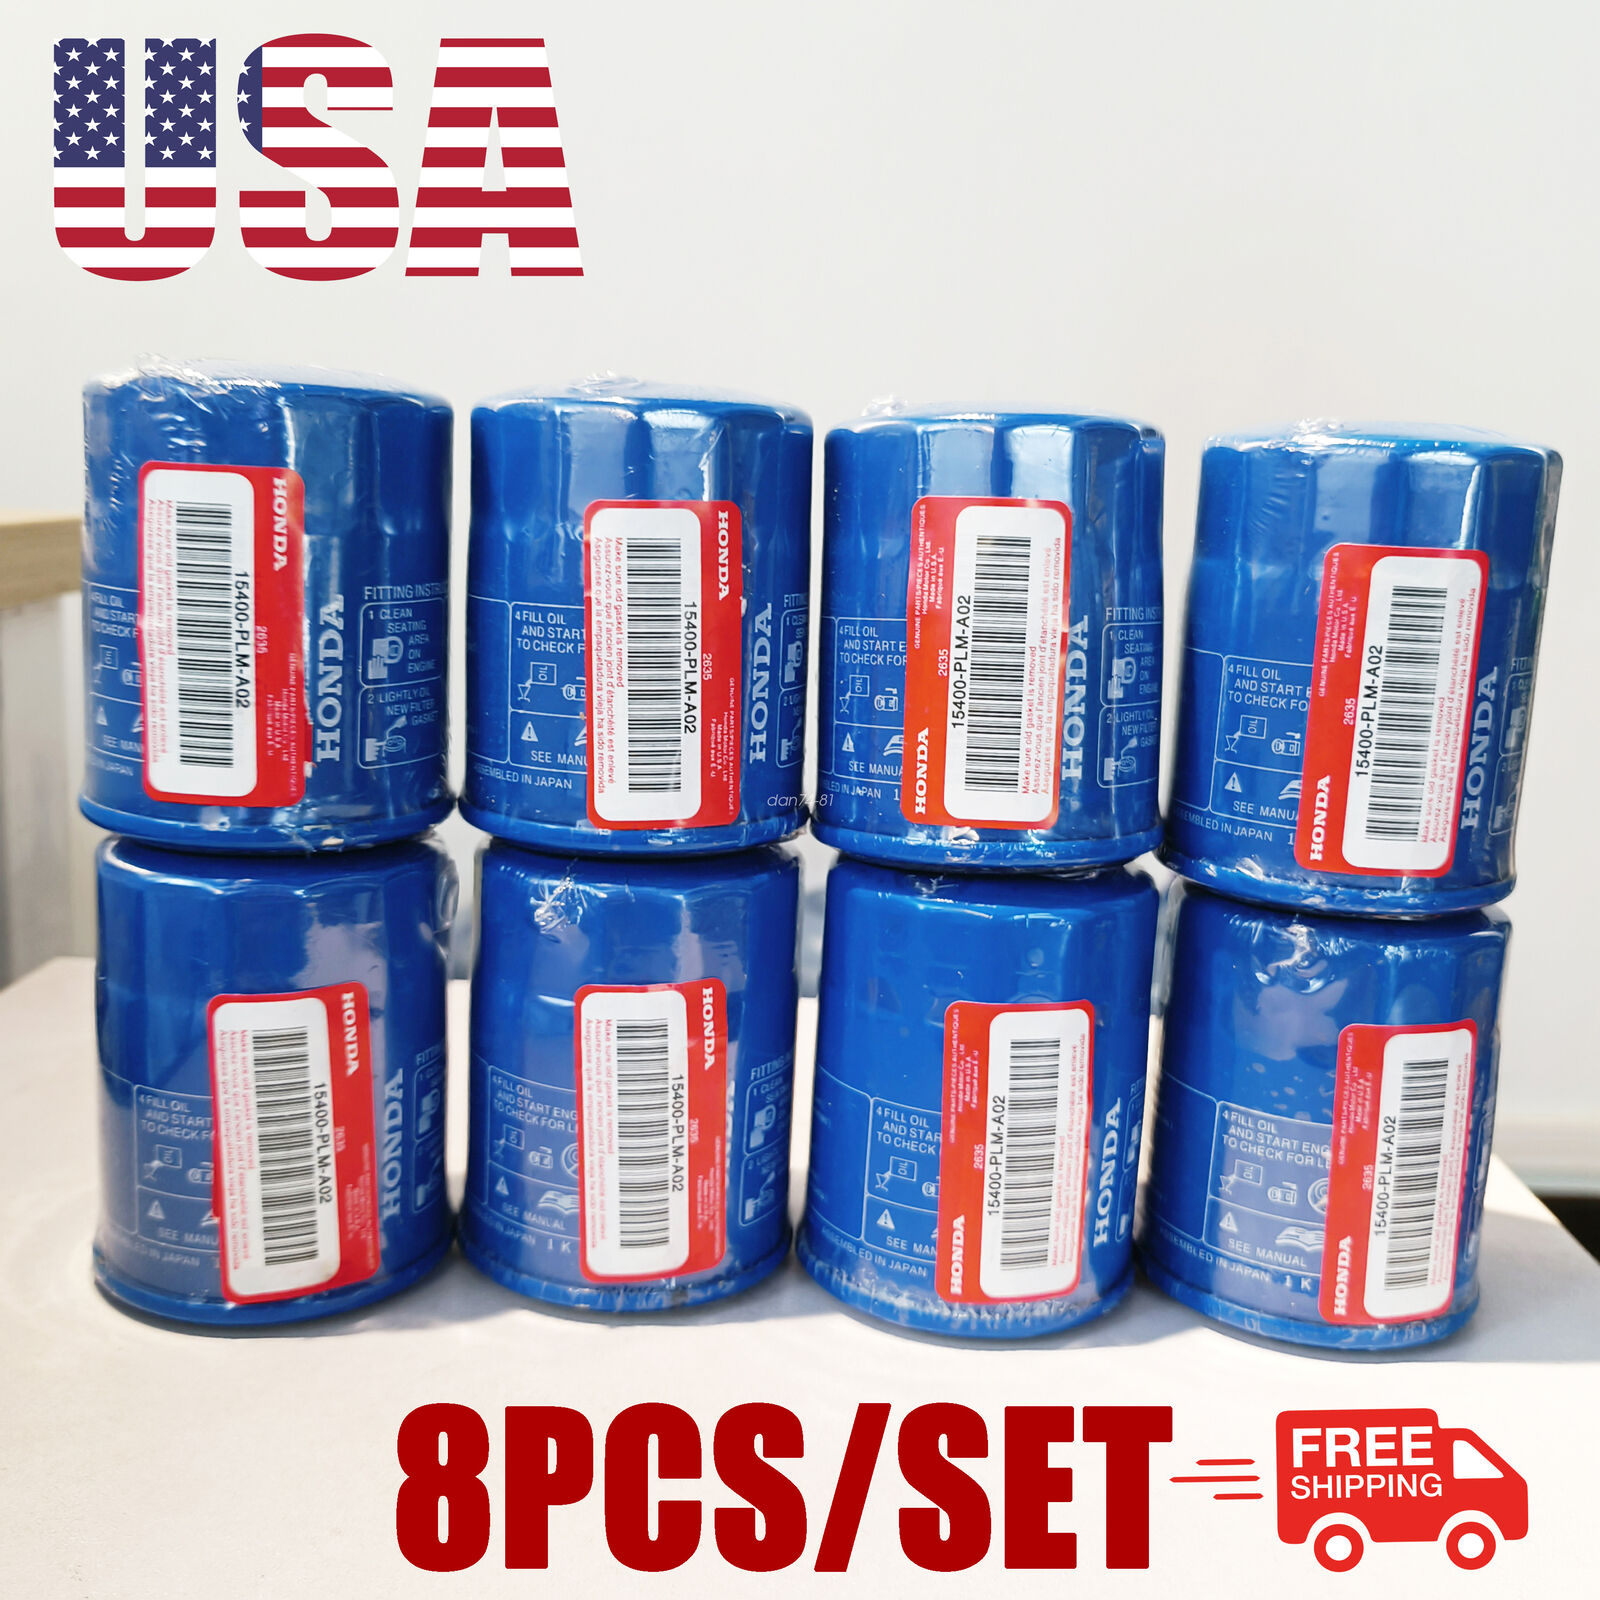 8Pcs Genuine Oil Filters 15400-PLM-A02 NEW For Honda Acura TLX RDX Civic 93-24